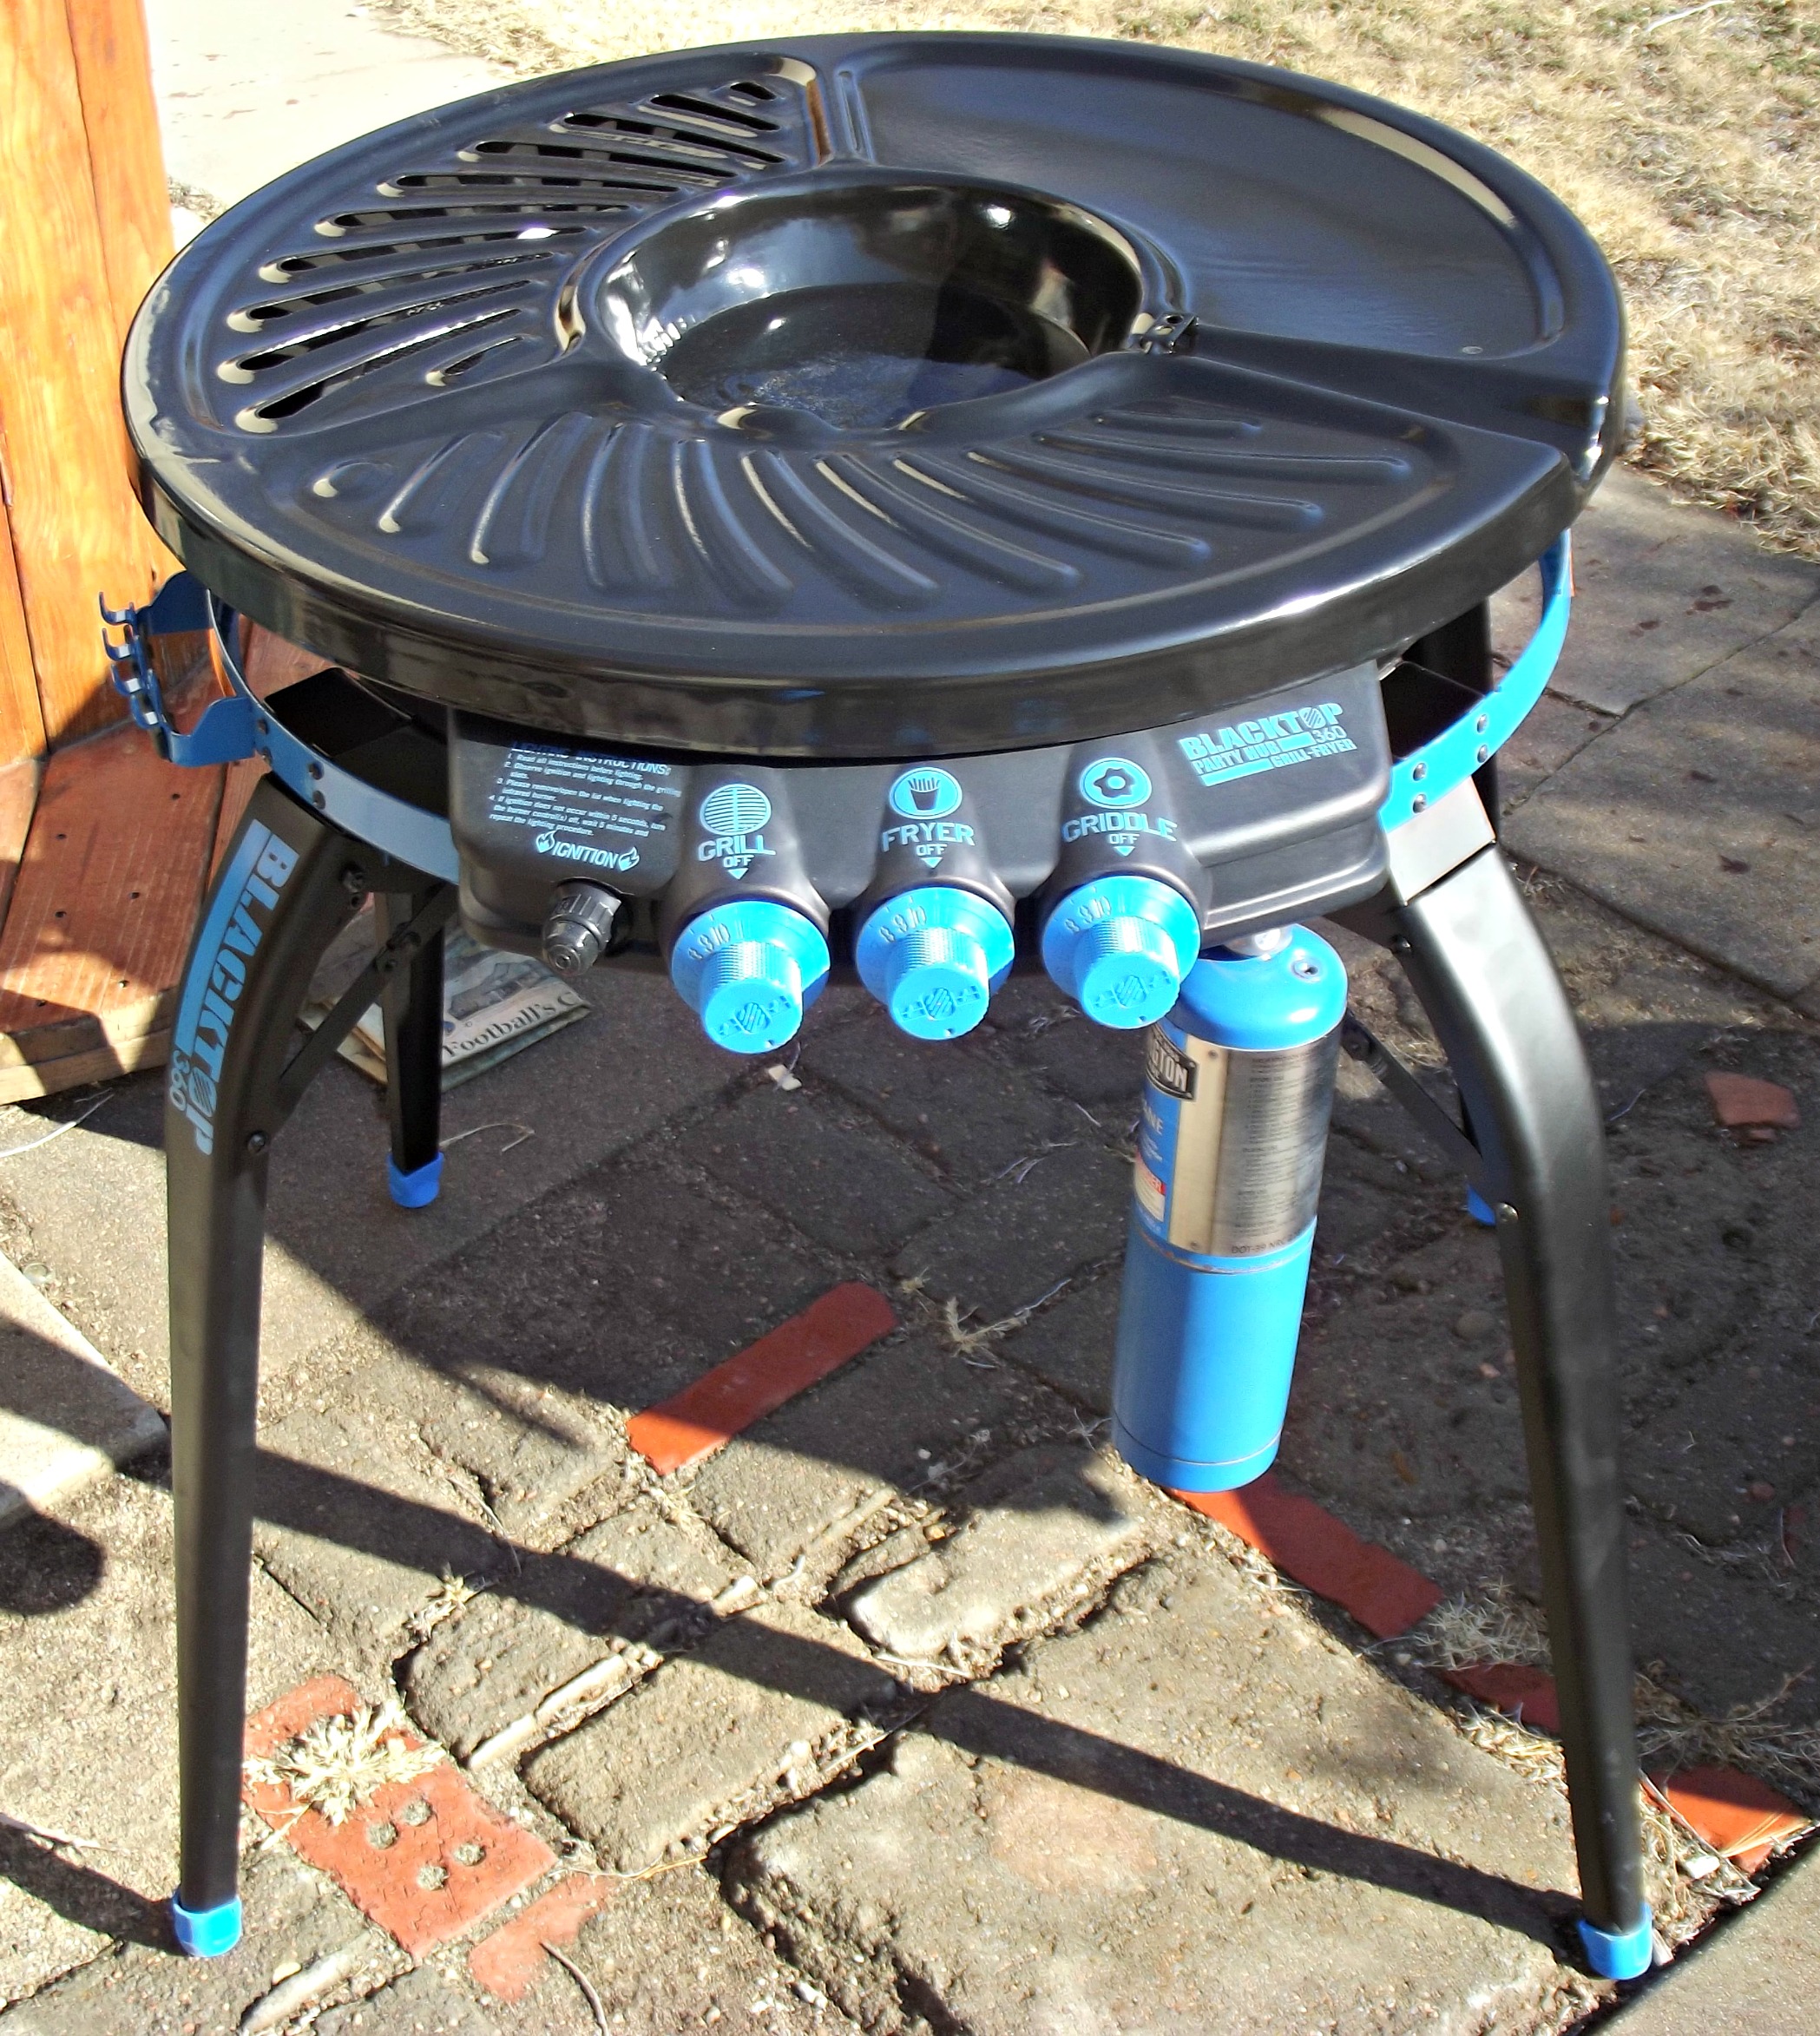 I am in Love with the Blacktop 360 Hub Party Grill-Fryer